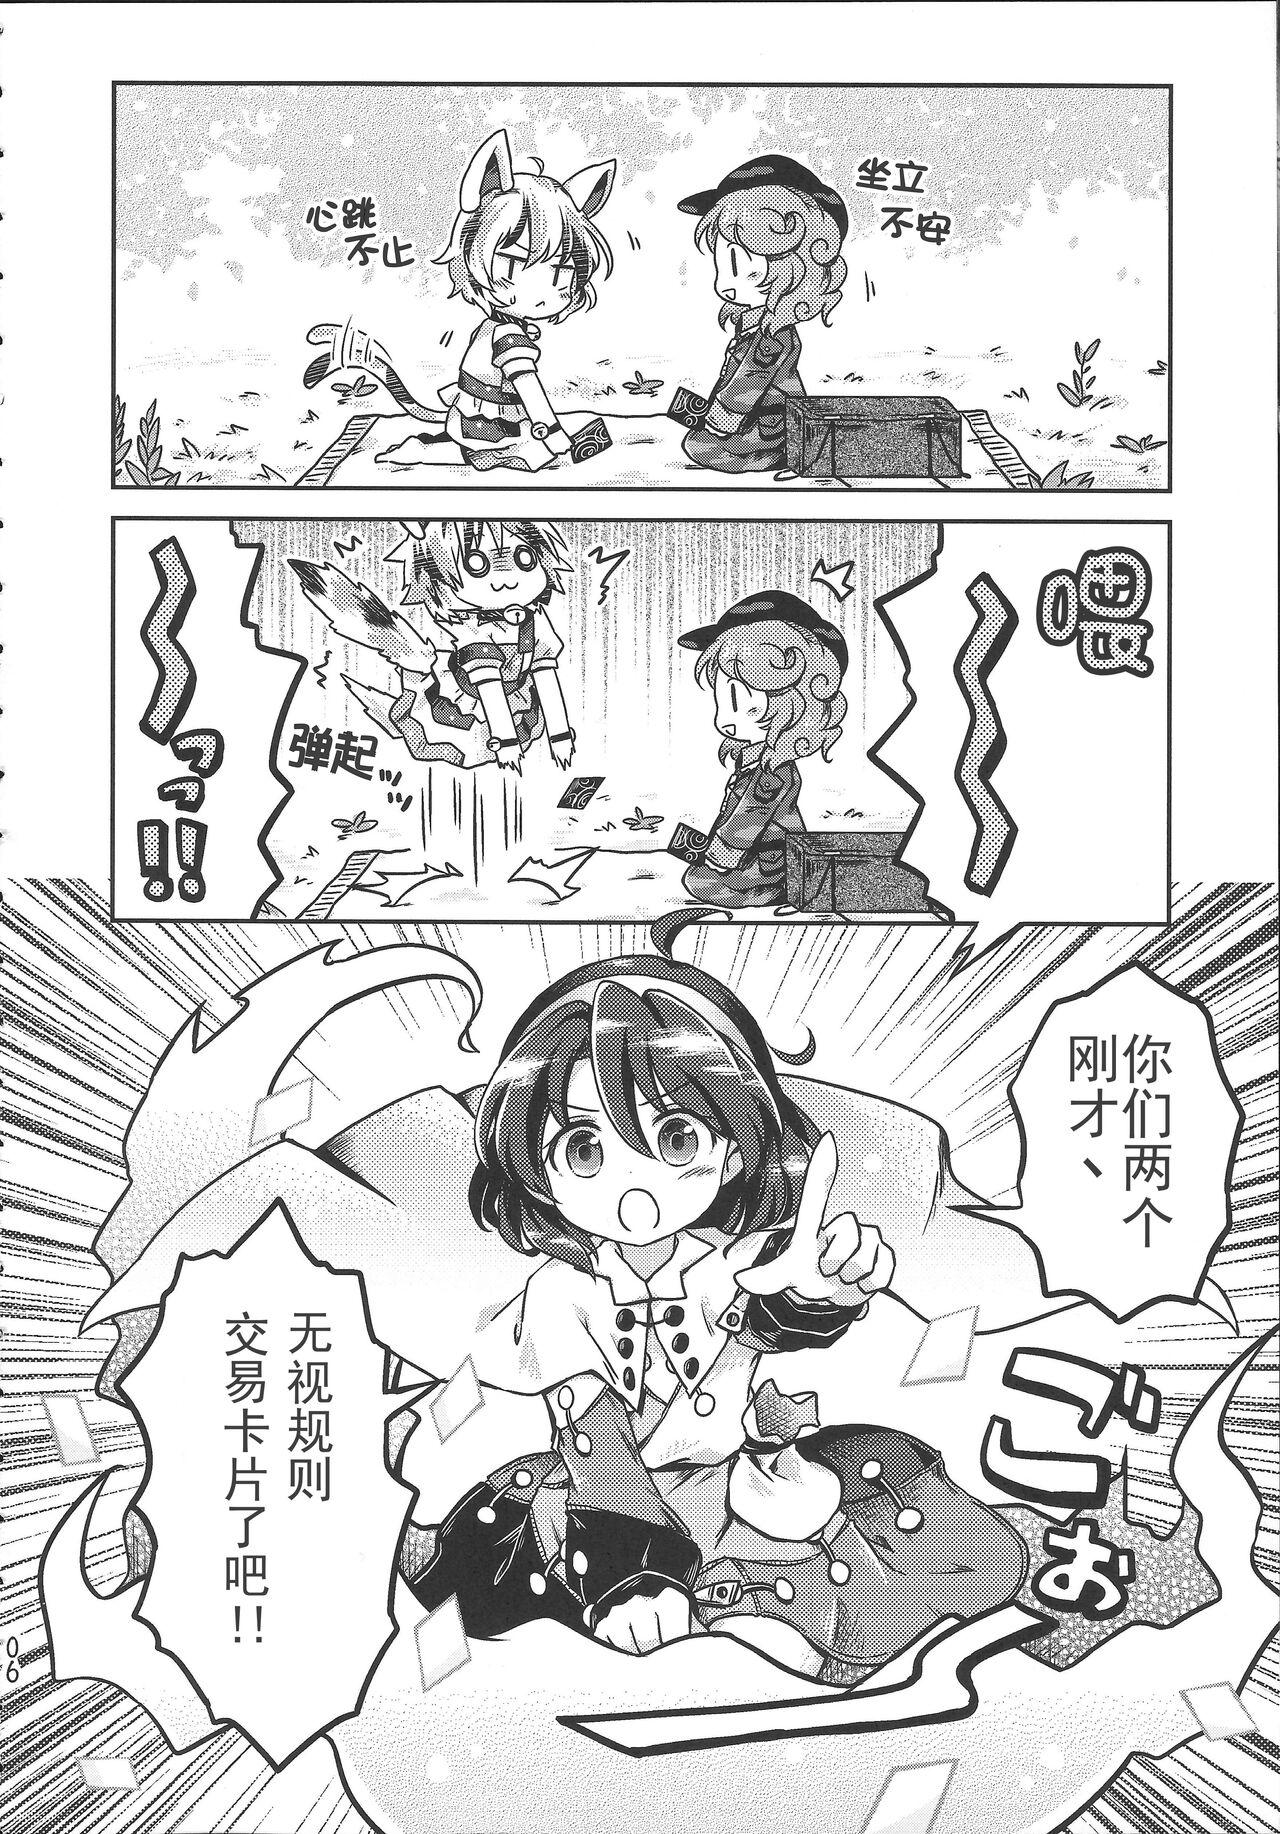 Whatsapp 《千亦酱的活动日志》 - Touhou project Sologirl - Page 6